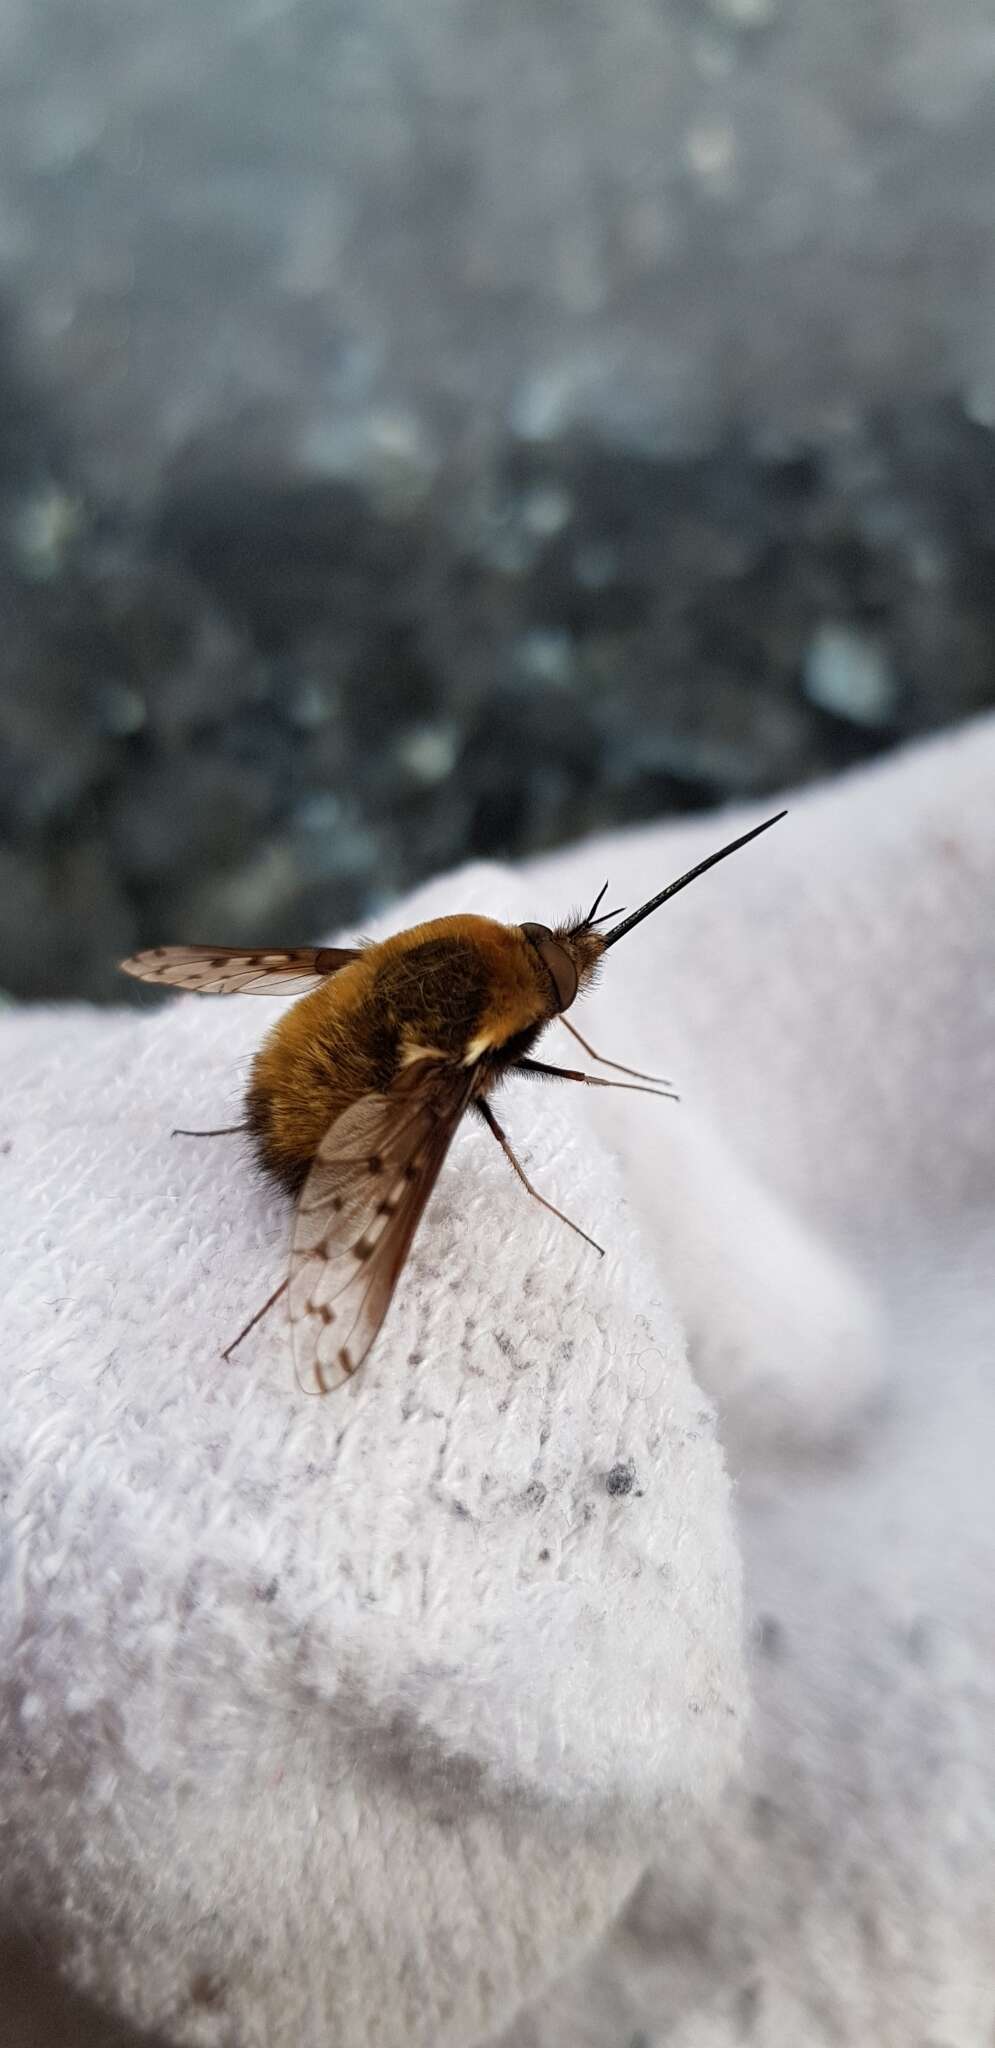 Image of Dotted bee-fly